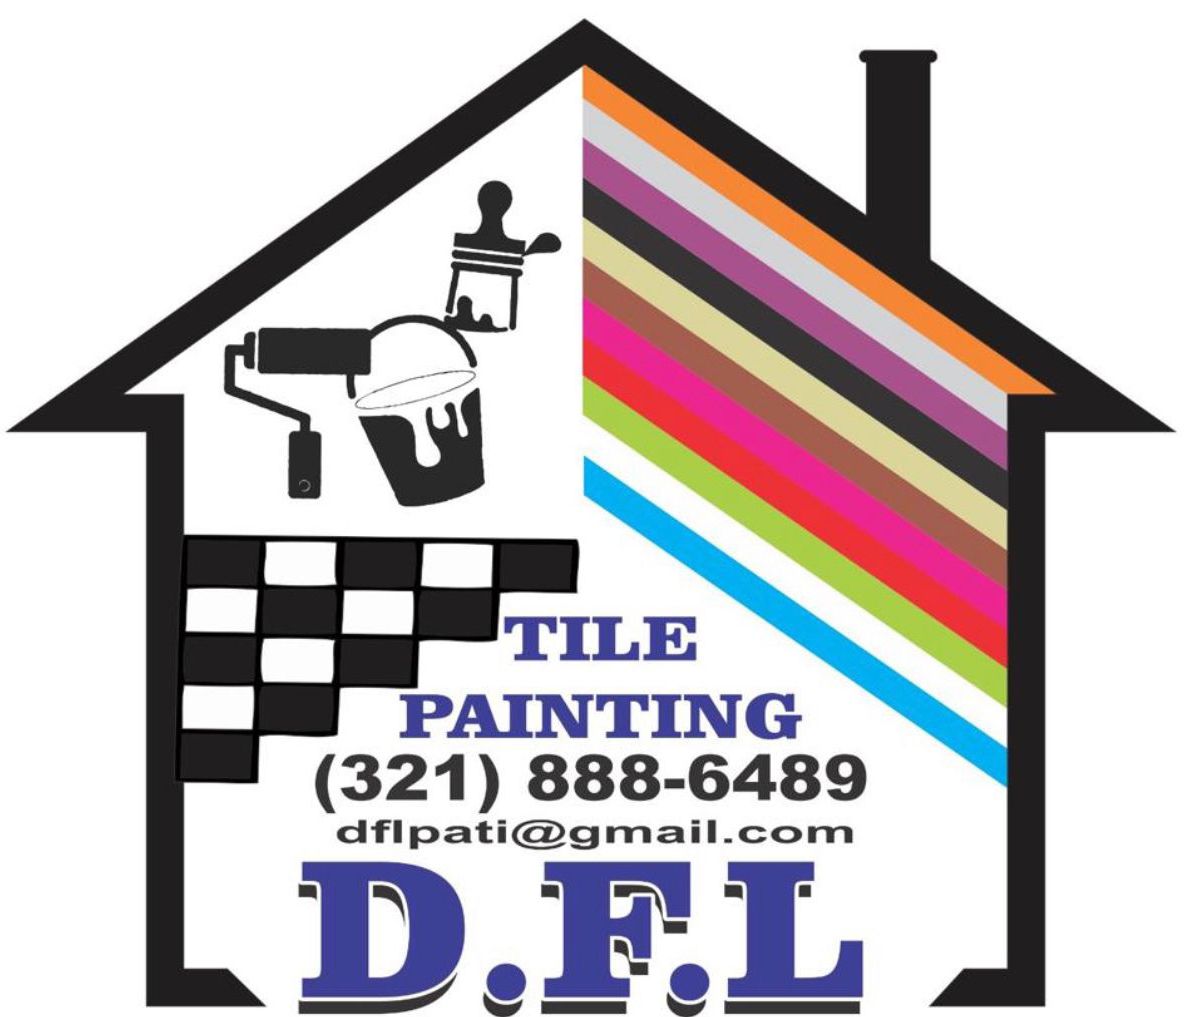 D.F.L. PAINTING & REMODELING